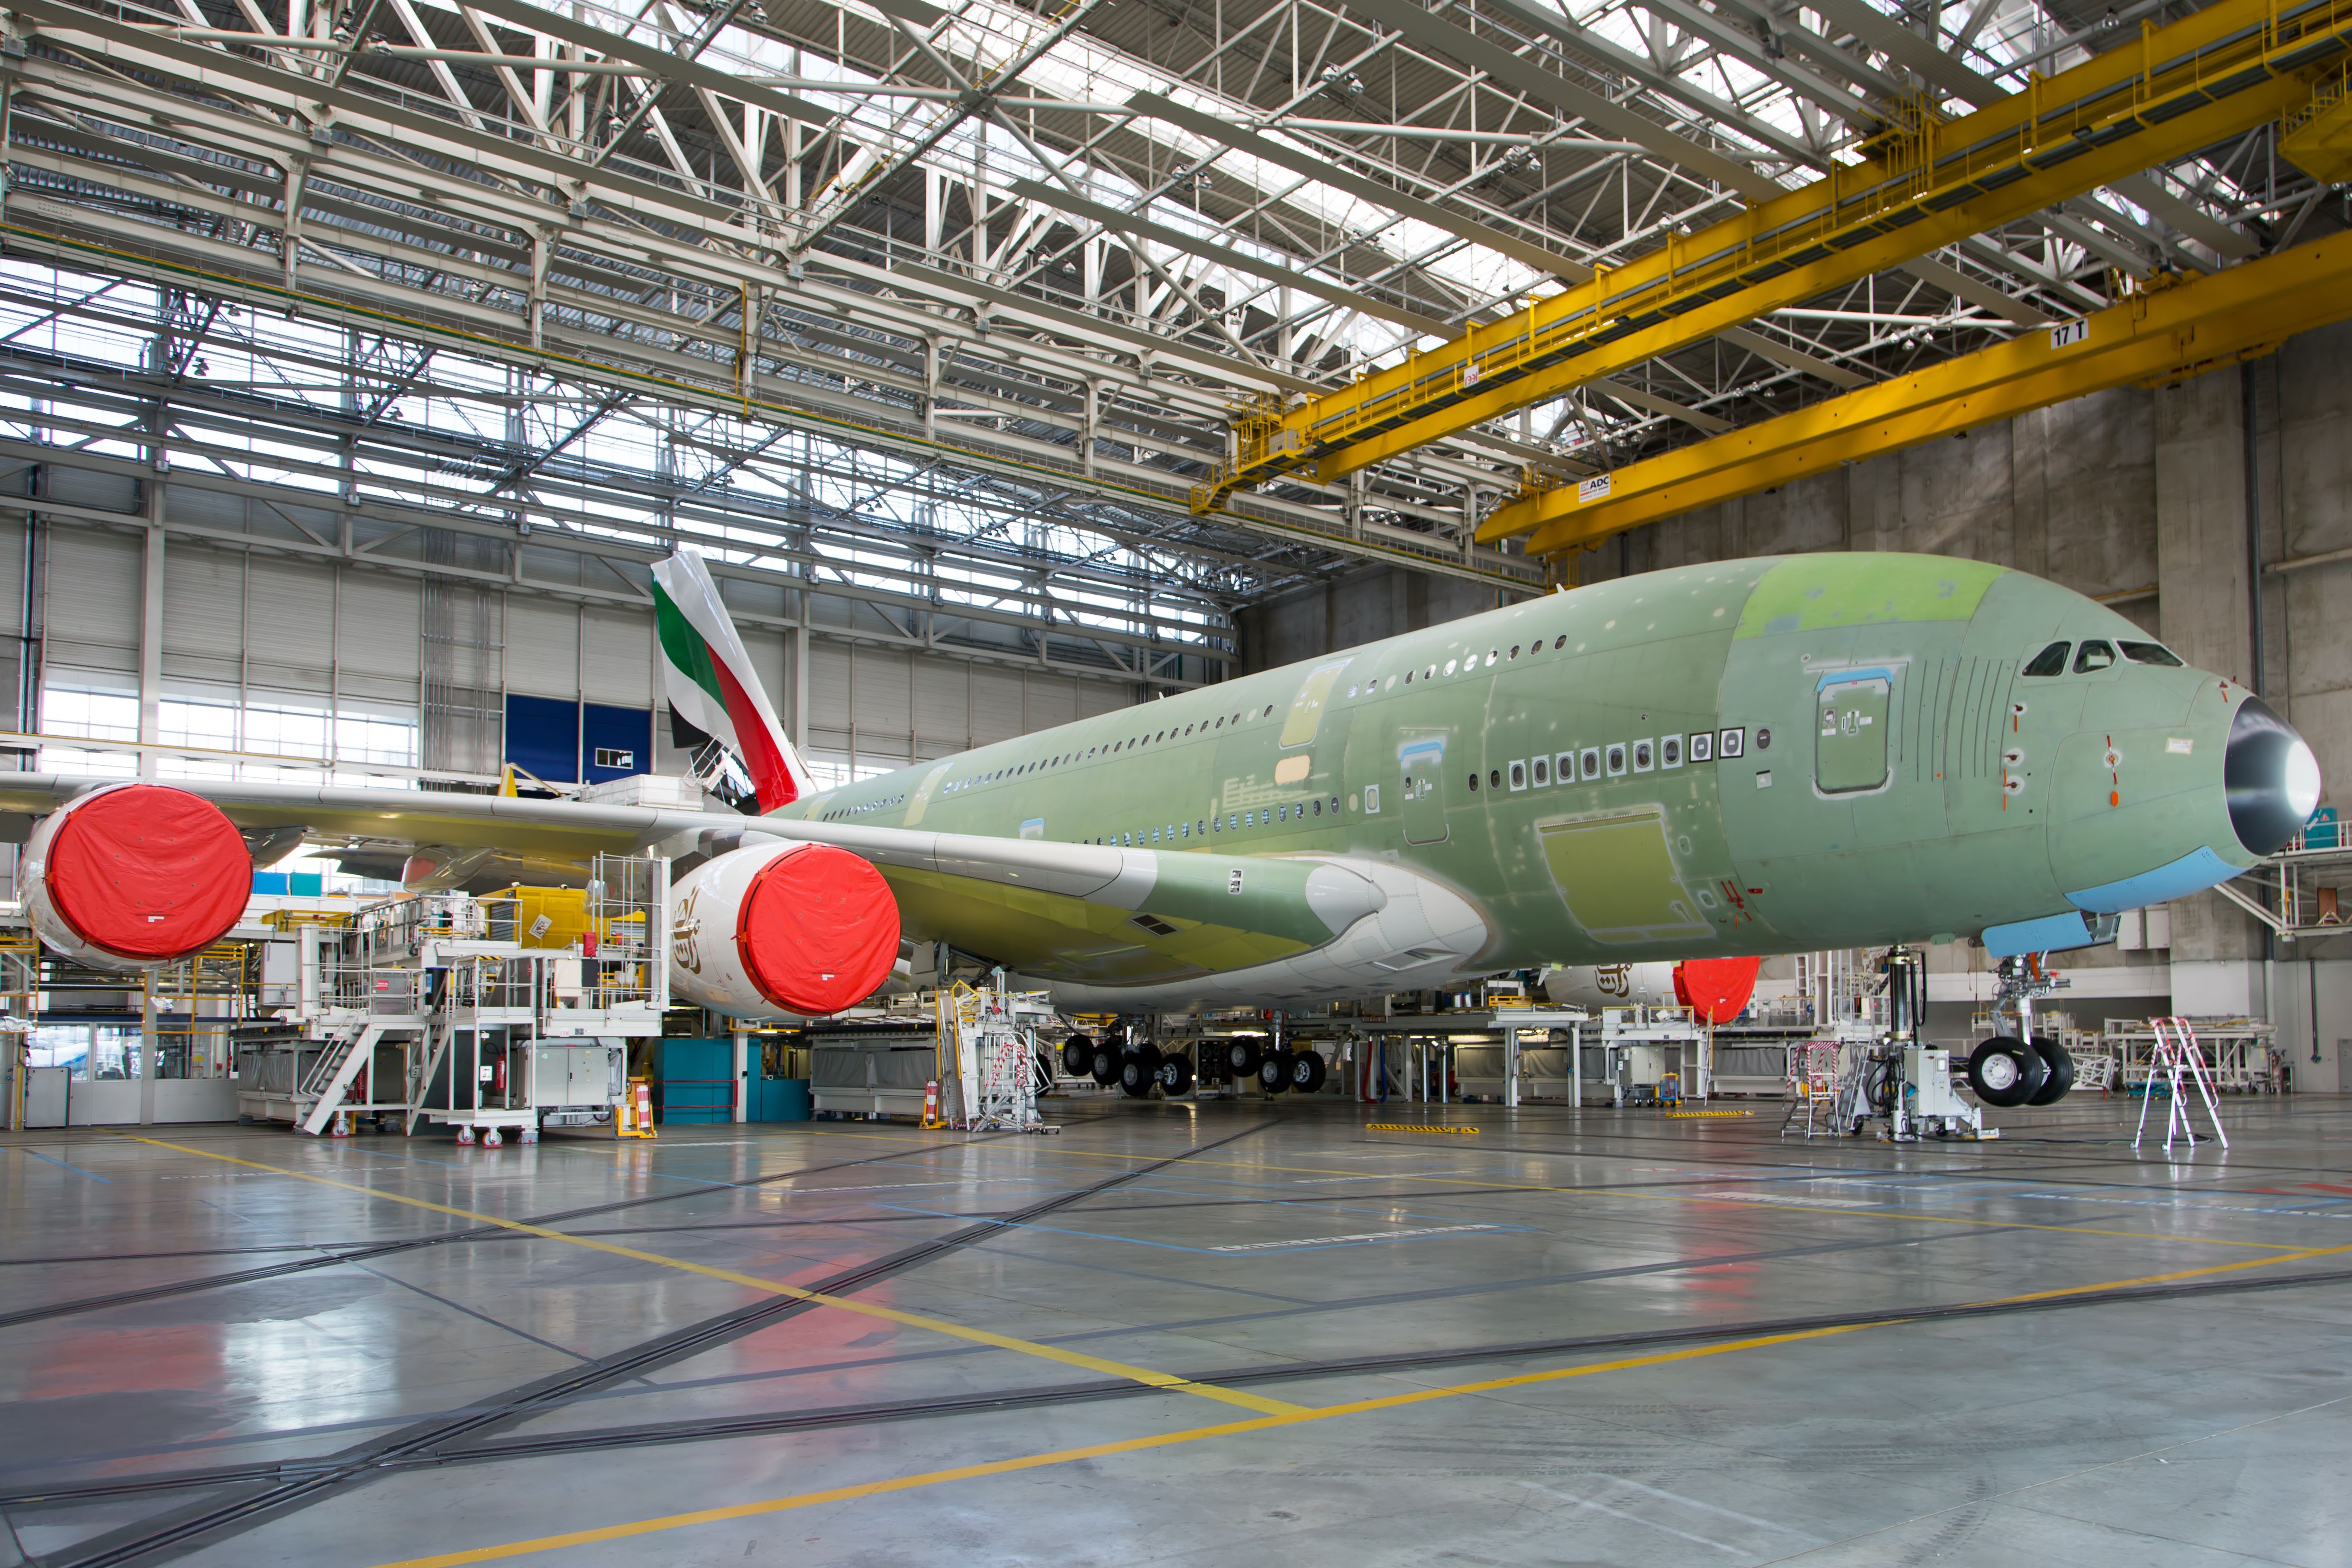 An Airbus A380 for Emirates being tested during manufacturing.